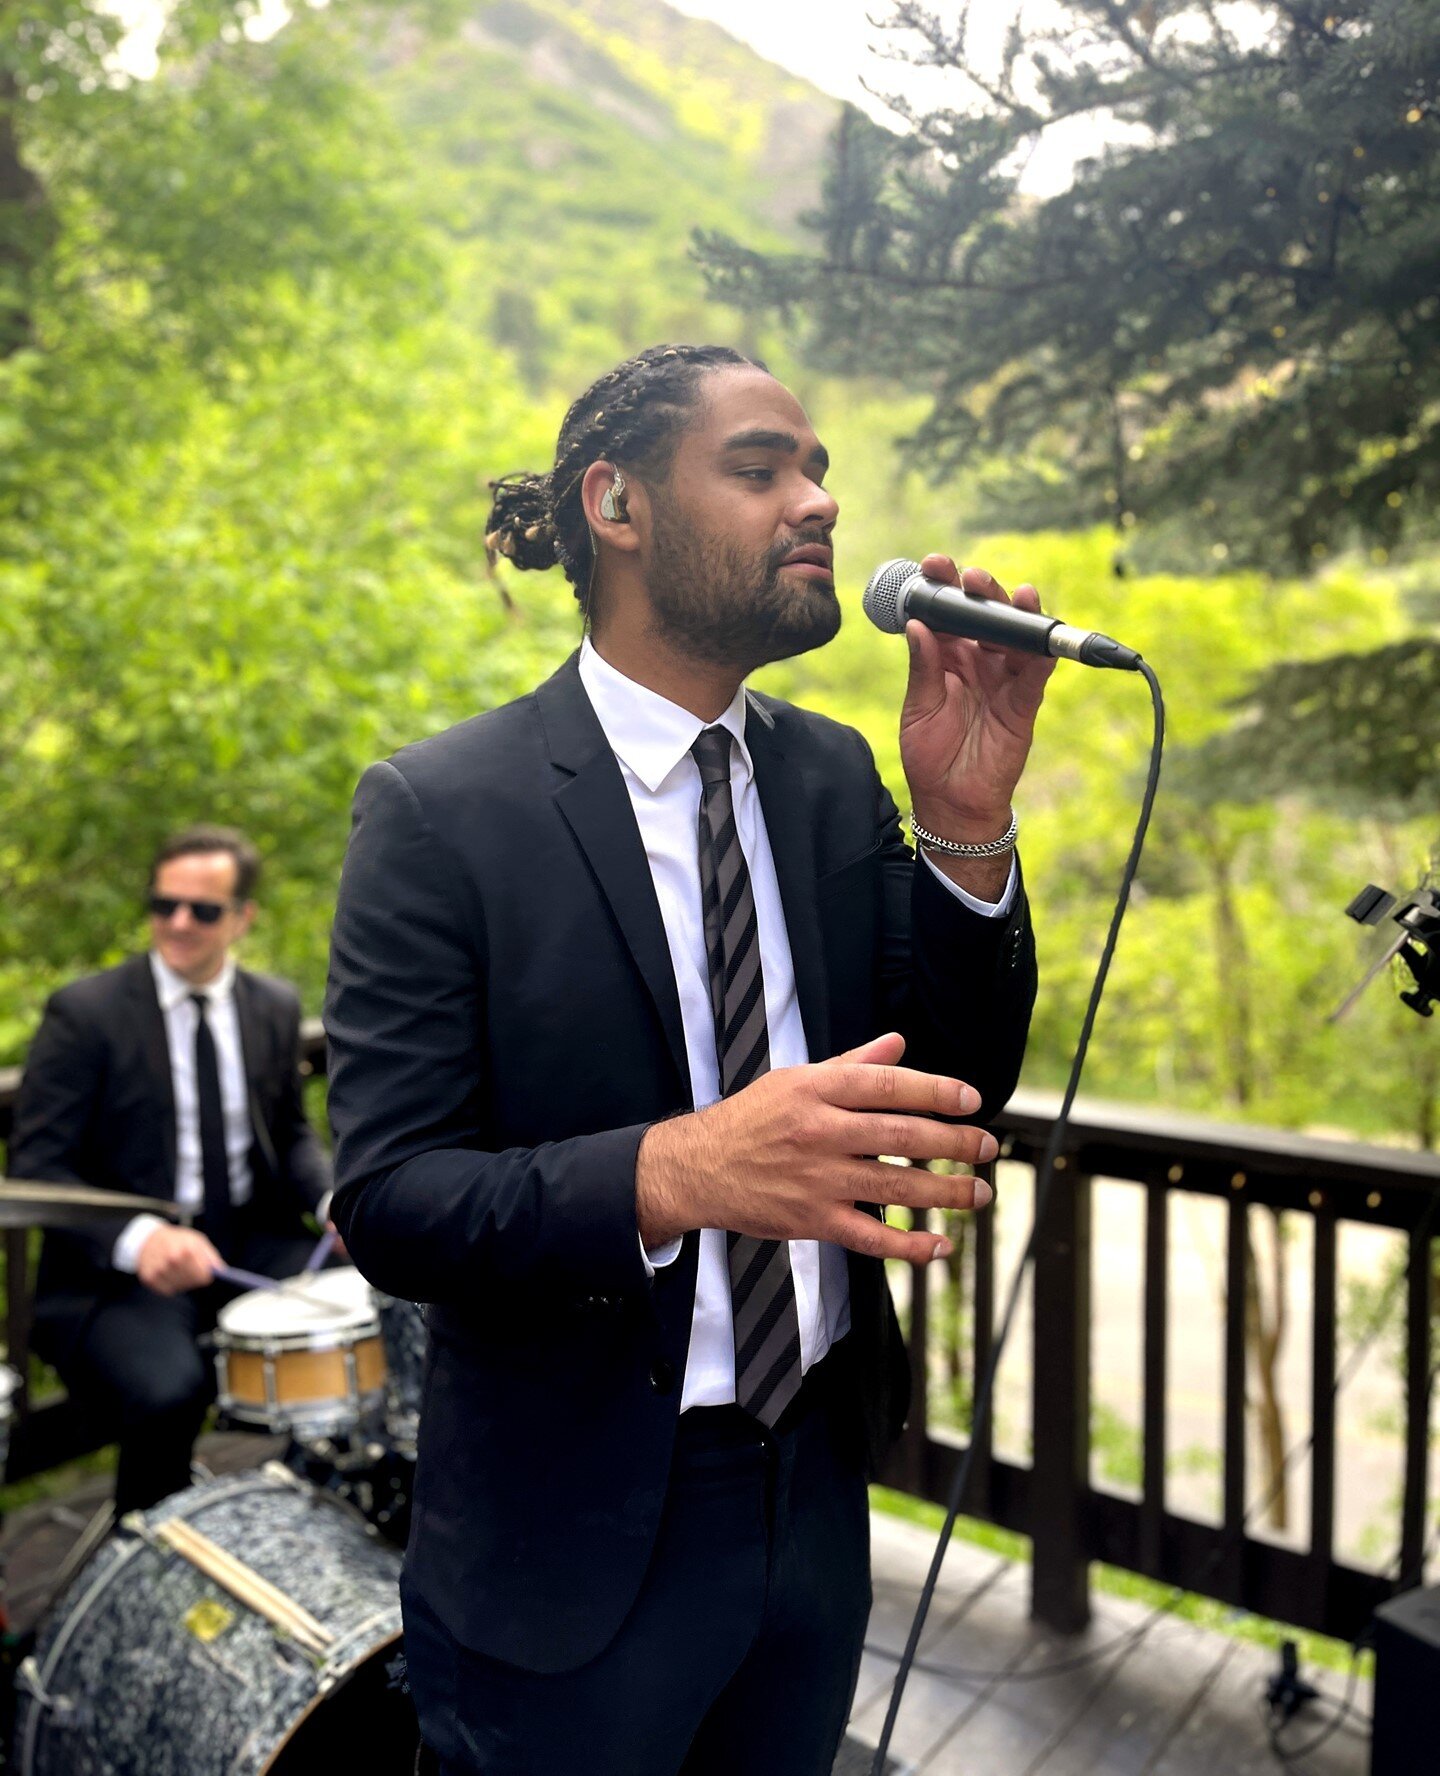 @iammicahwillis crooning to the crowd up at @millcreekinn 🎶 What a beautiful place for a wedding!